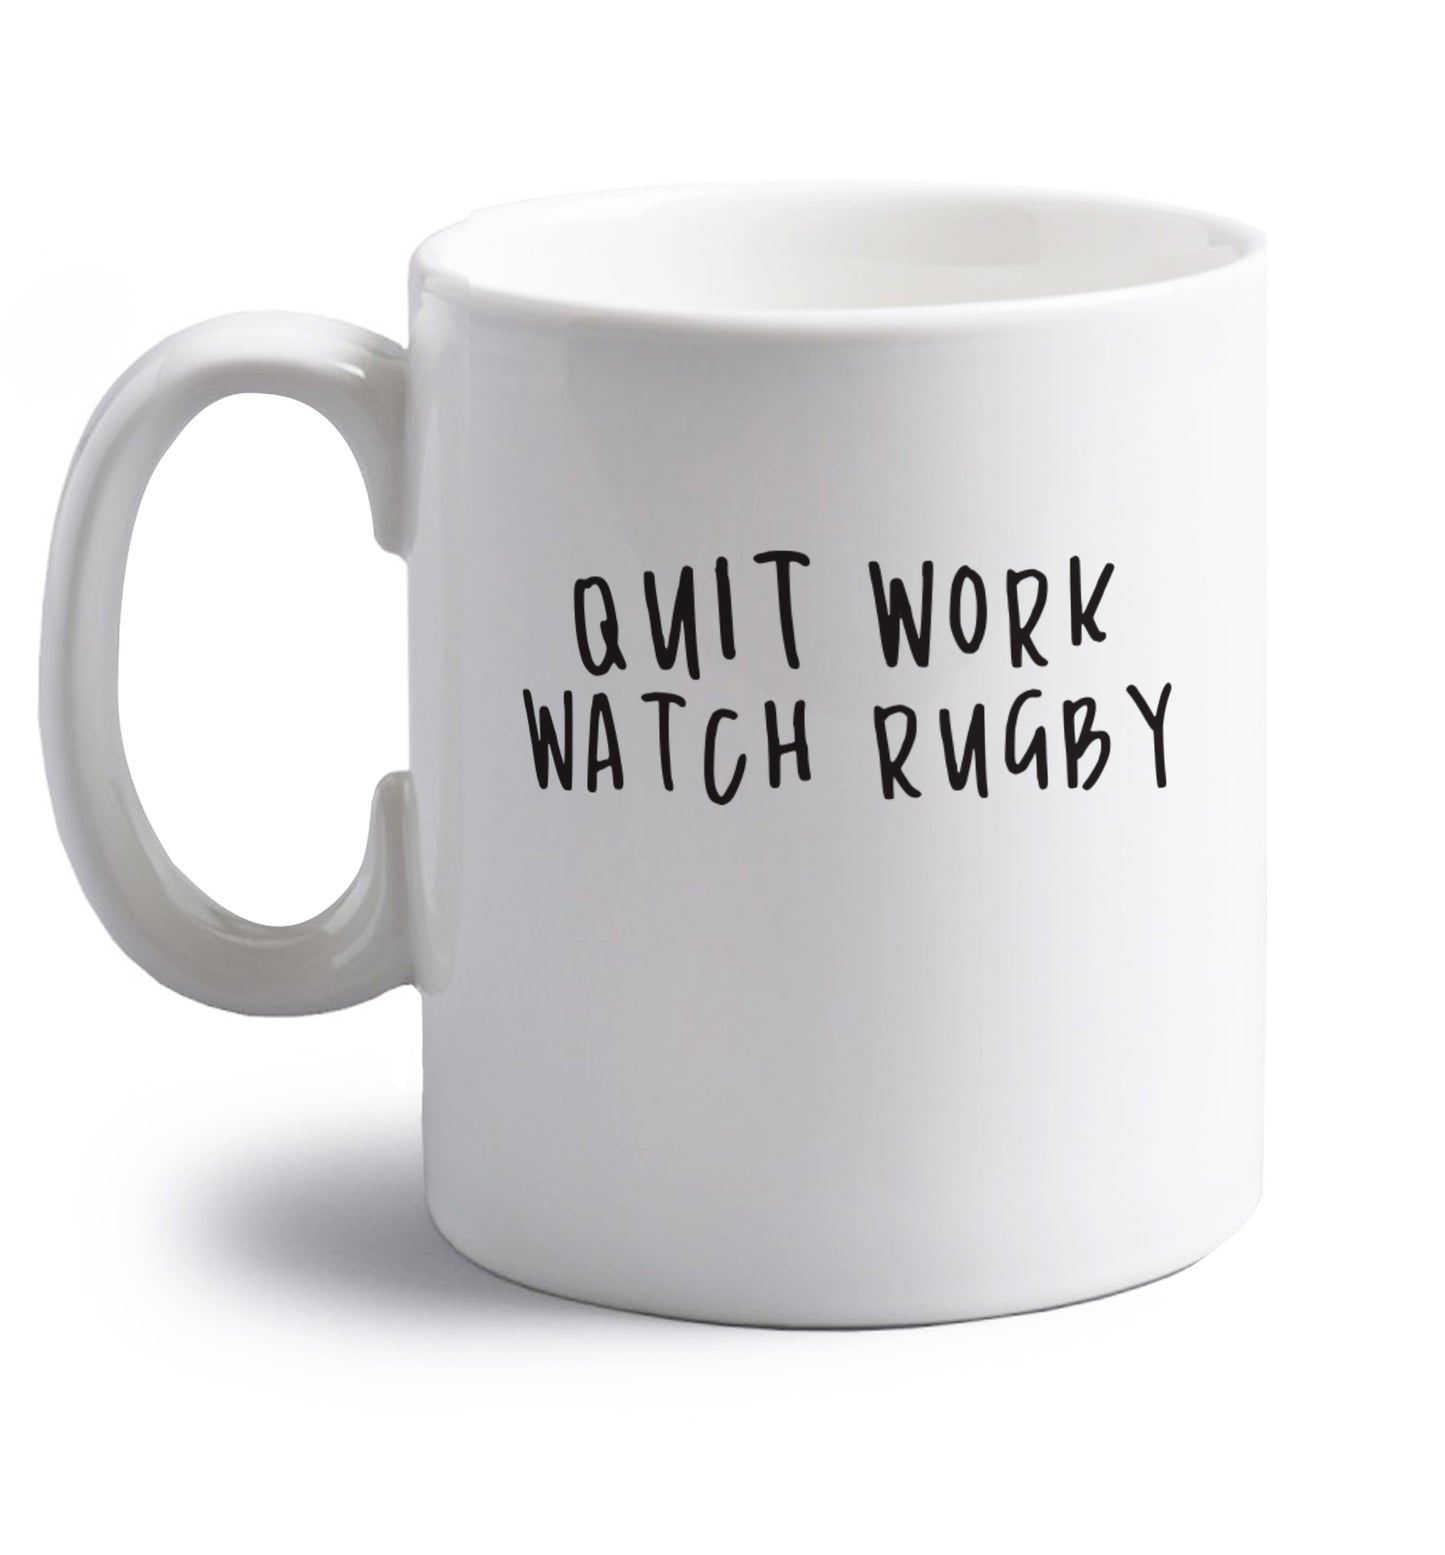 Quit work watch rugby right handed white ceramic mug 